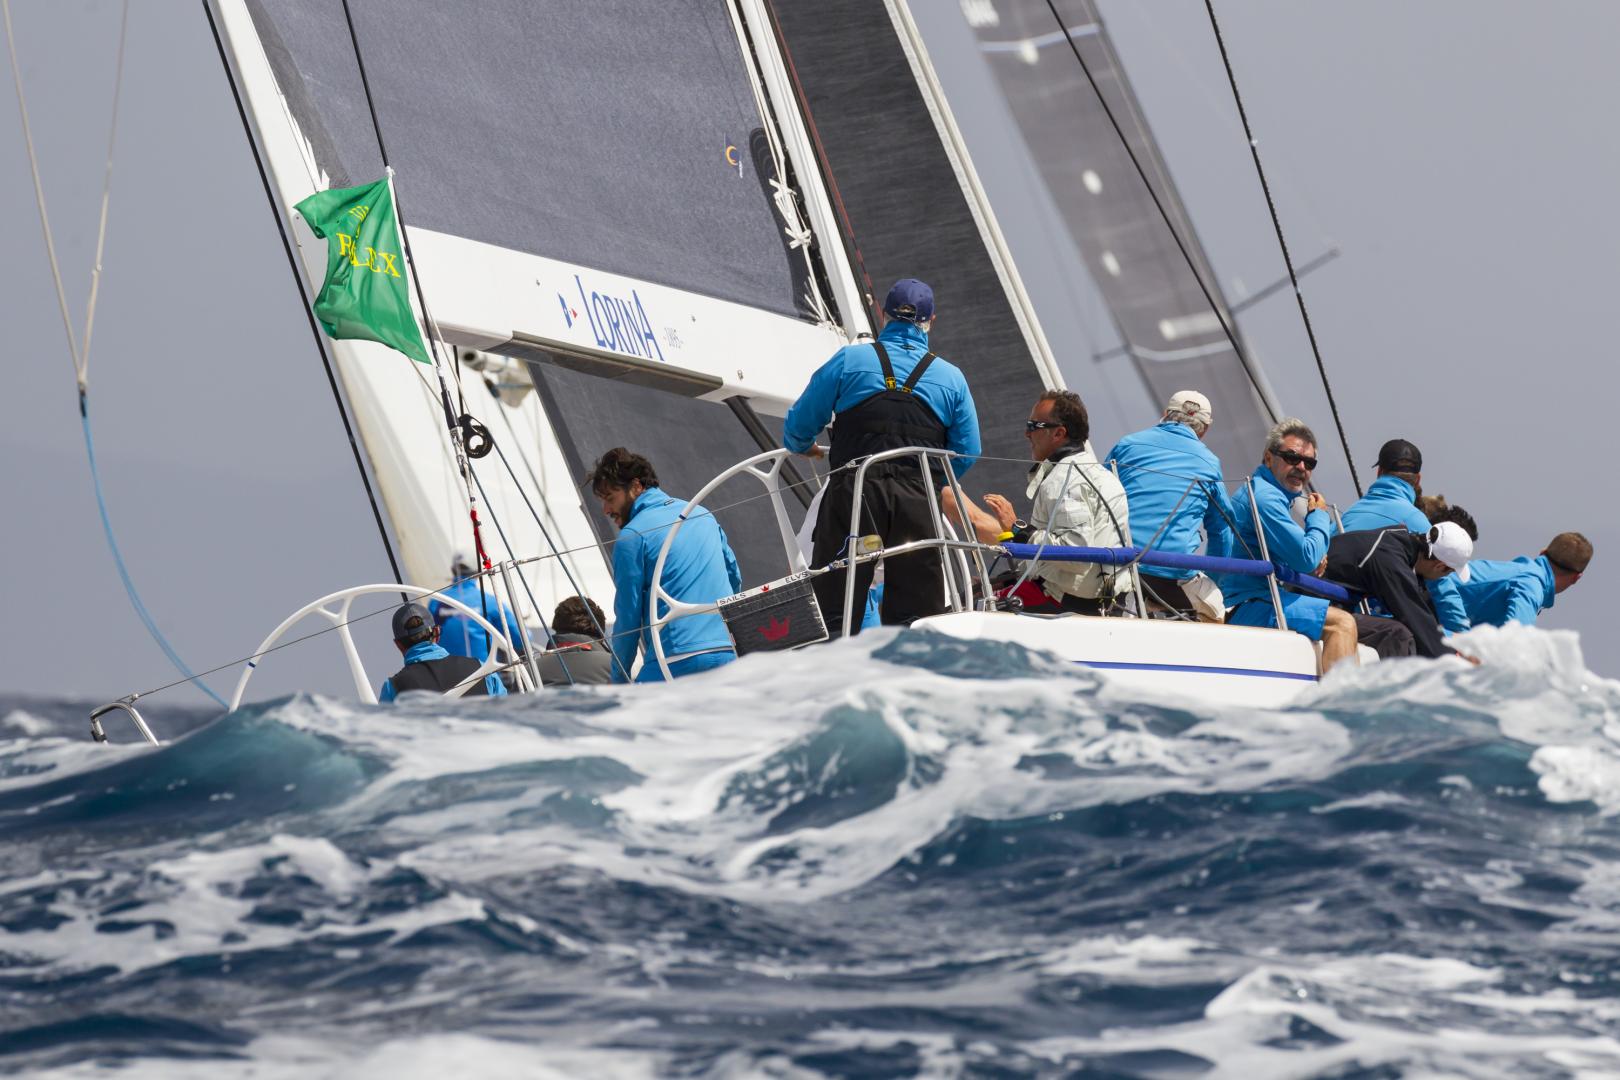 Foiled after lightning and lightening wind at Rolex Giraglia